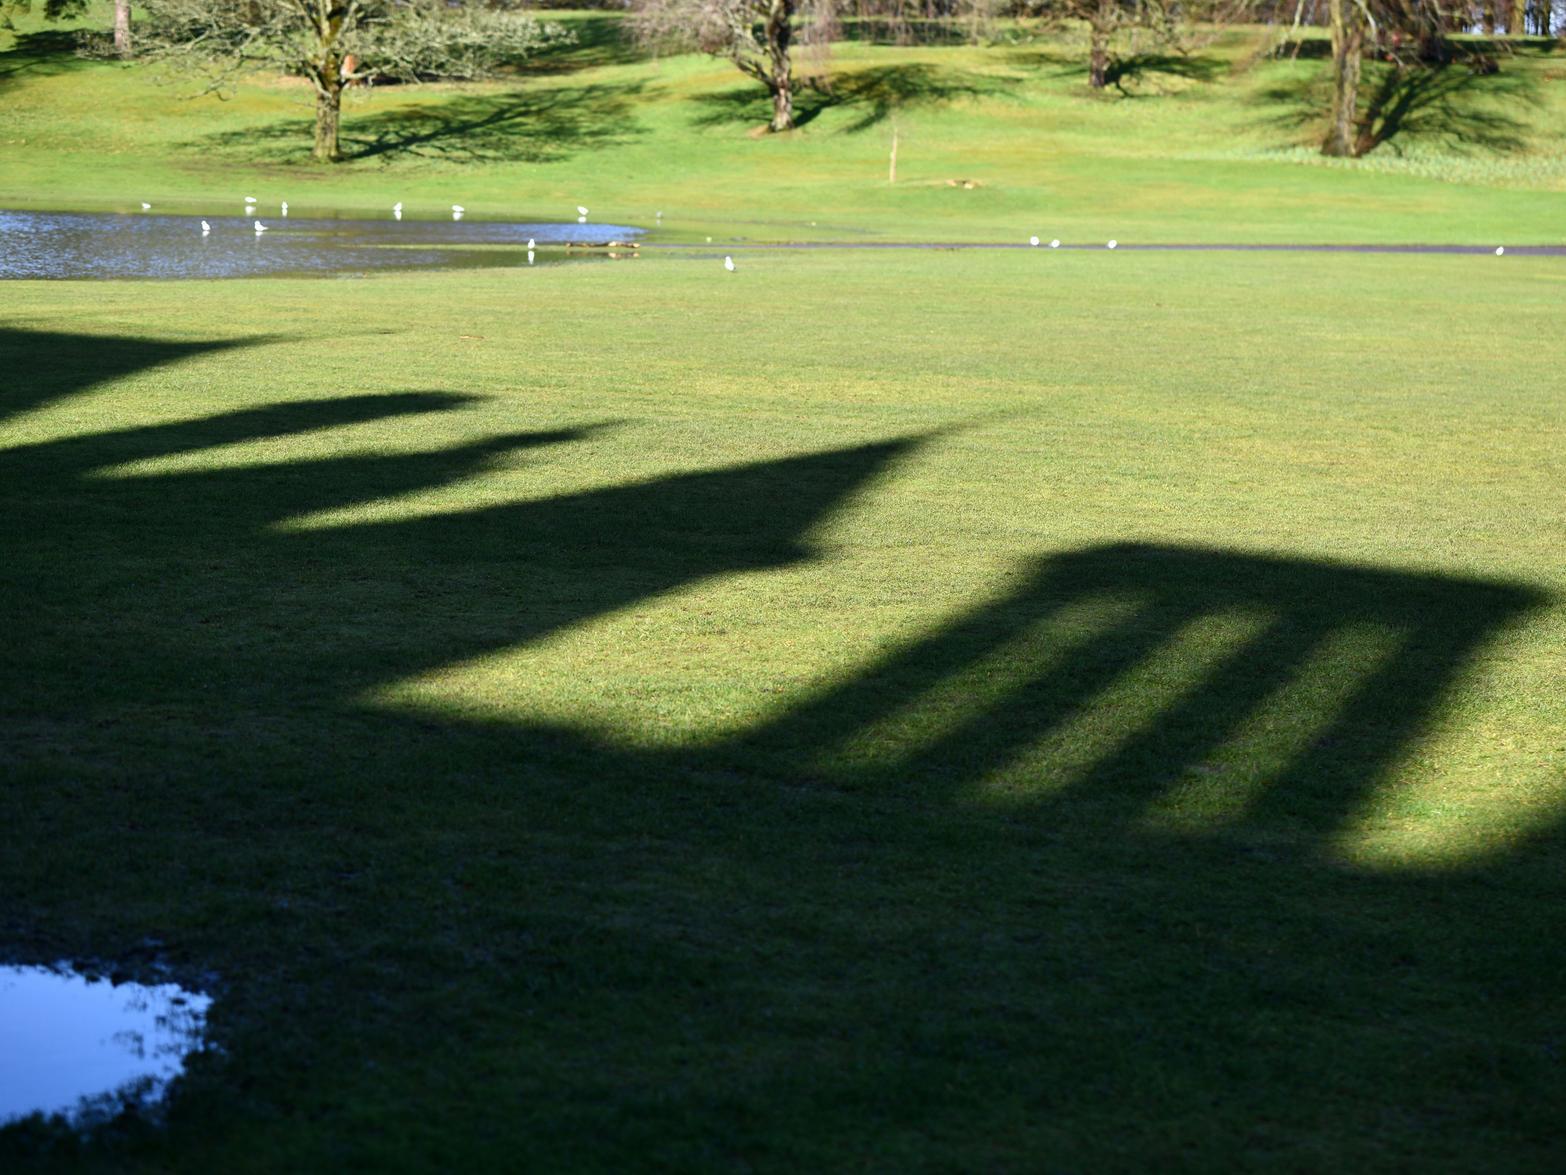 Shadow of Callendar House on the lawn.